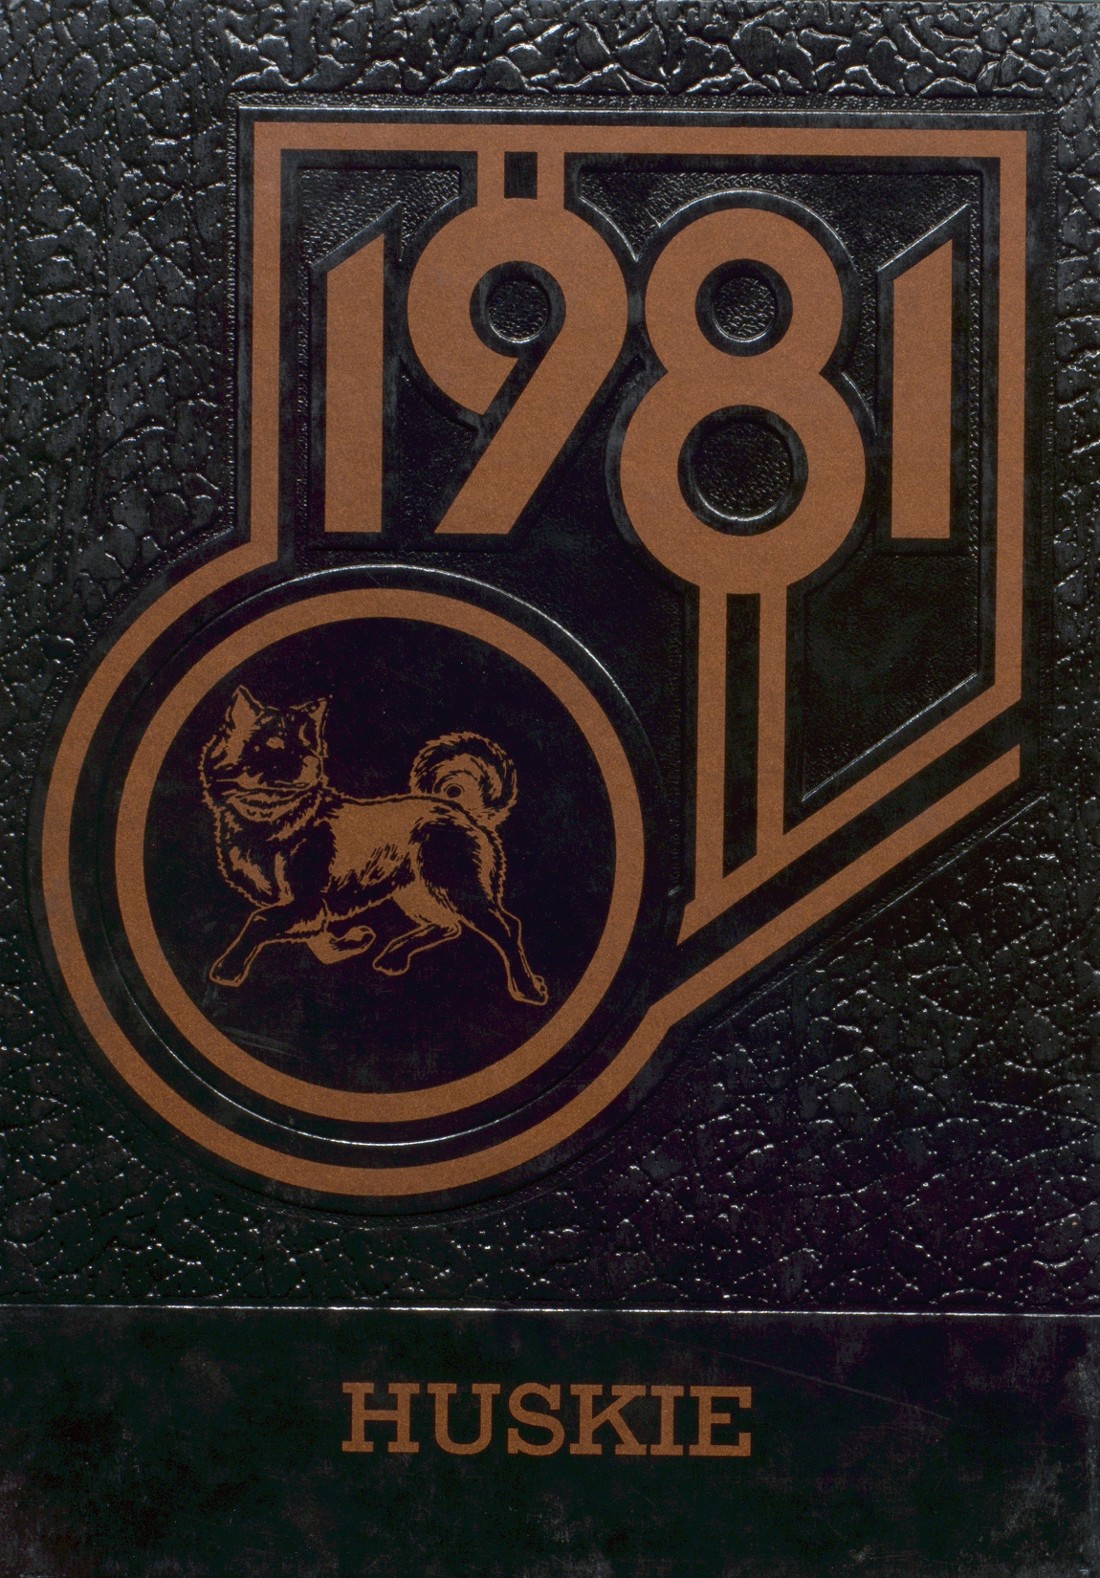 1981 yearbook from Mason City High School from Mason city, Illinois for ...